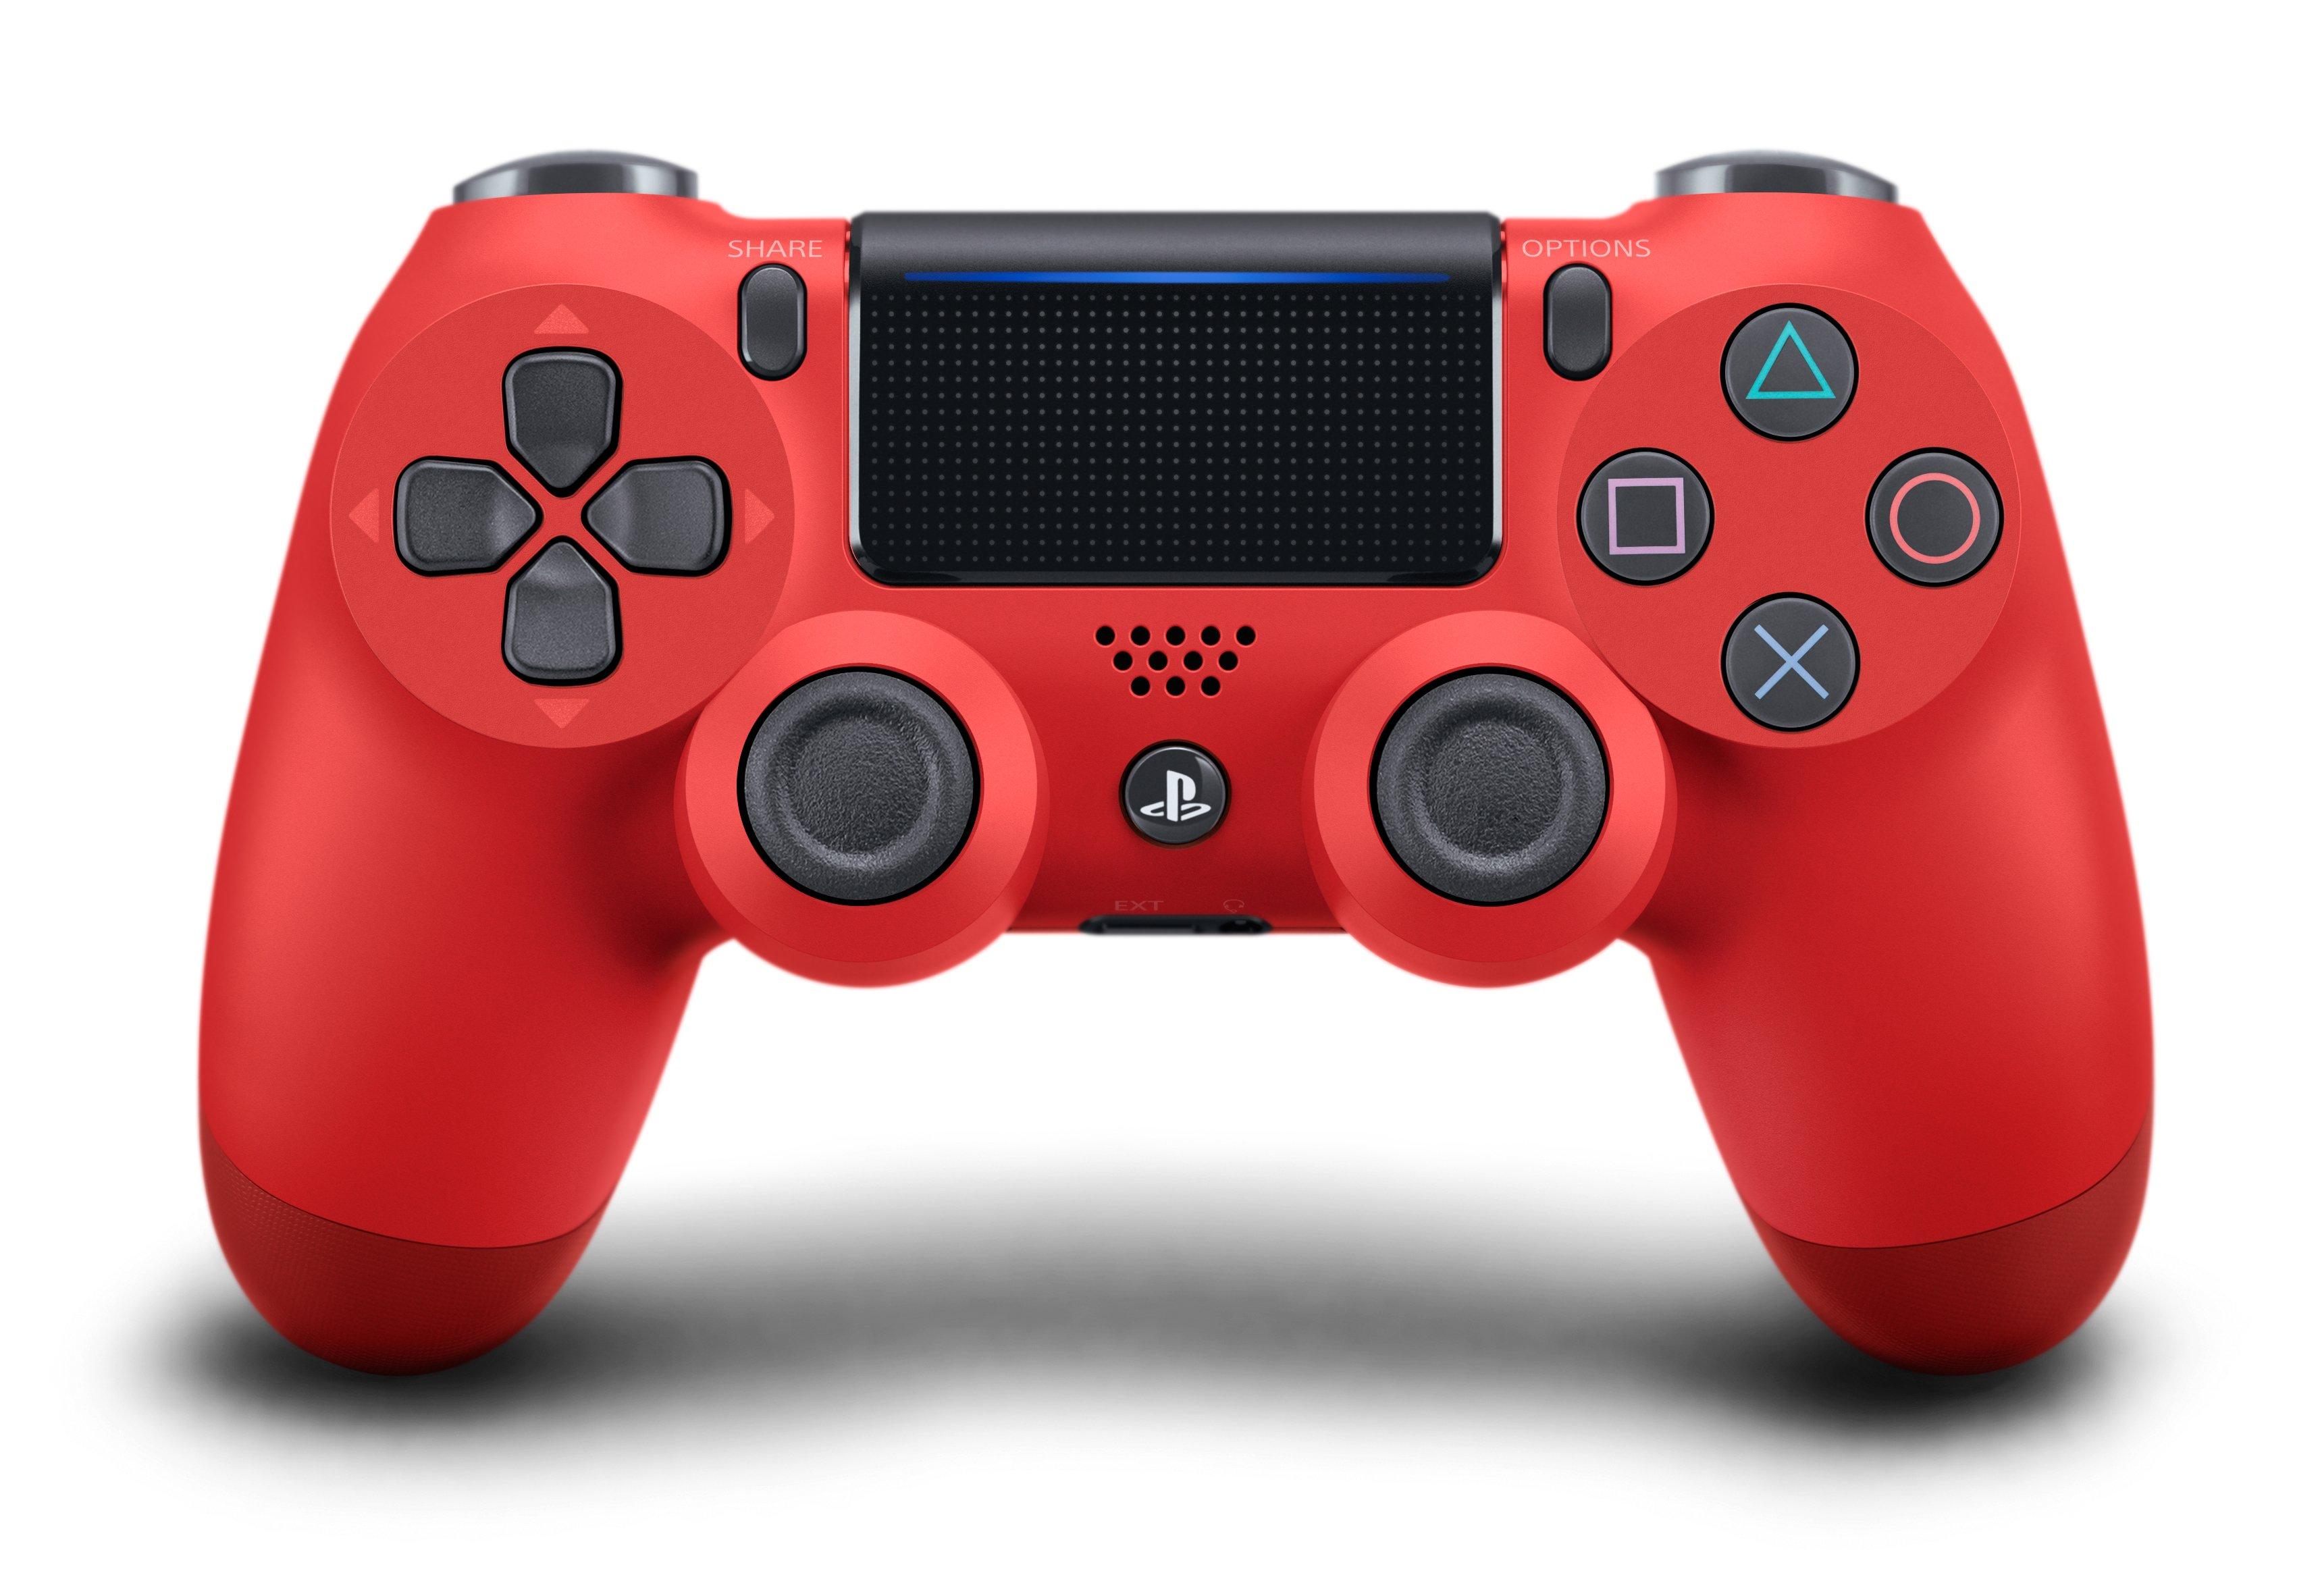 Sony DUALSHOCK 4 Wireless Controller for PlayStation 4 - Red | GameStop